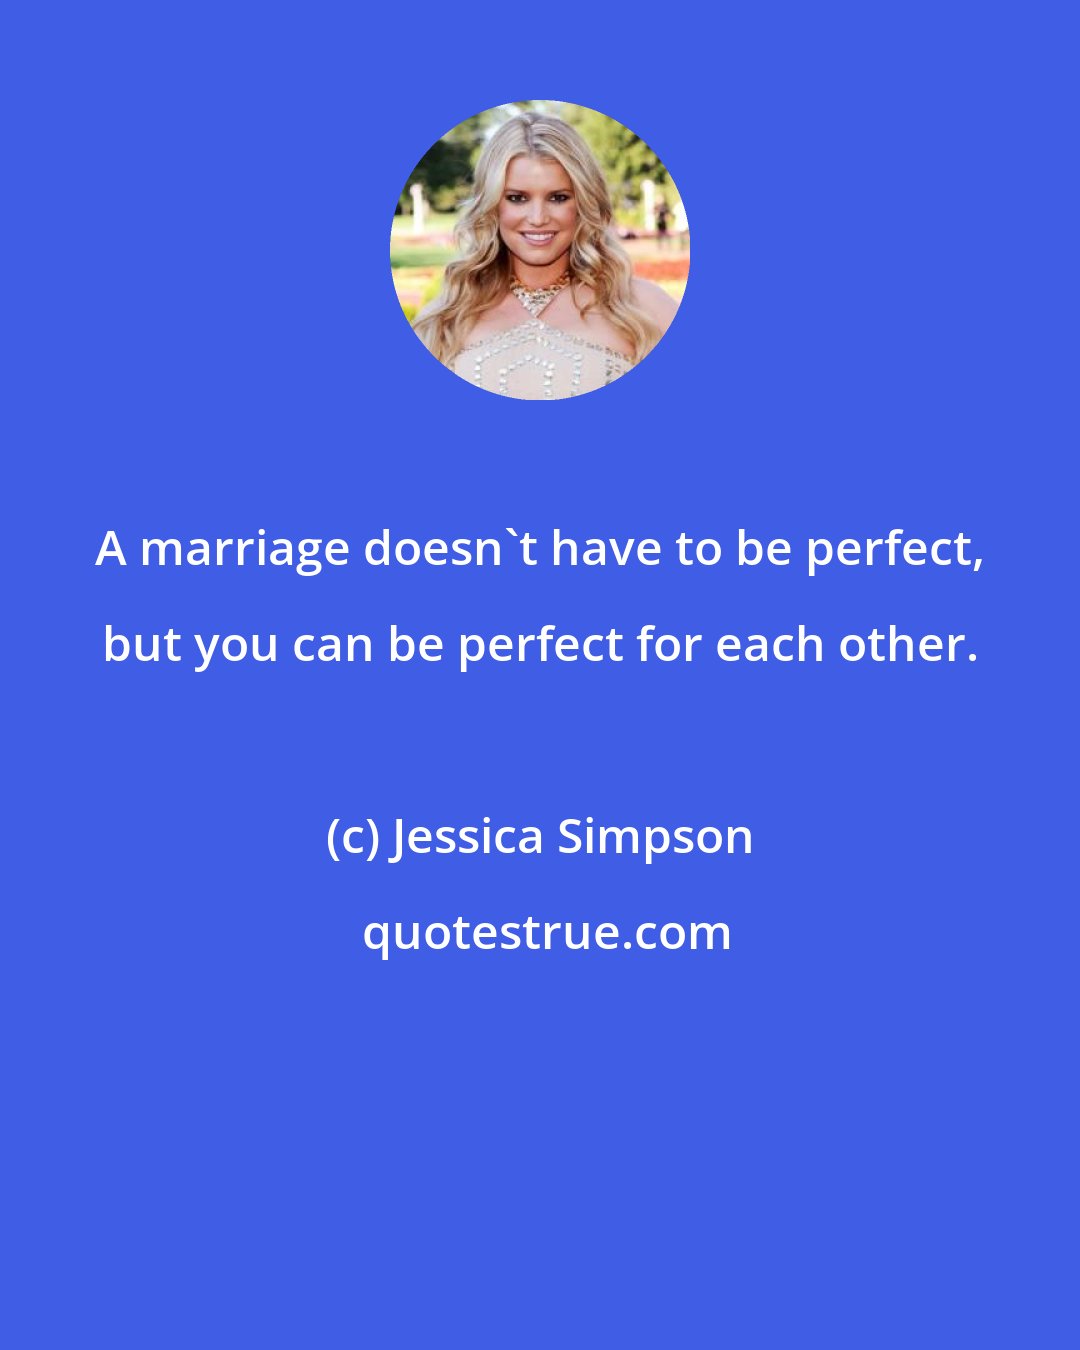 Jessica Simpson: A marriage doesn't have to be perfect, but you can be perfect for each other.